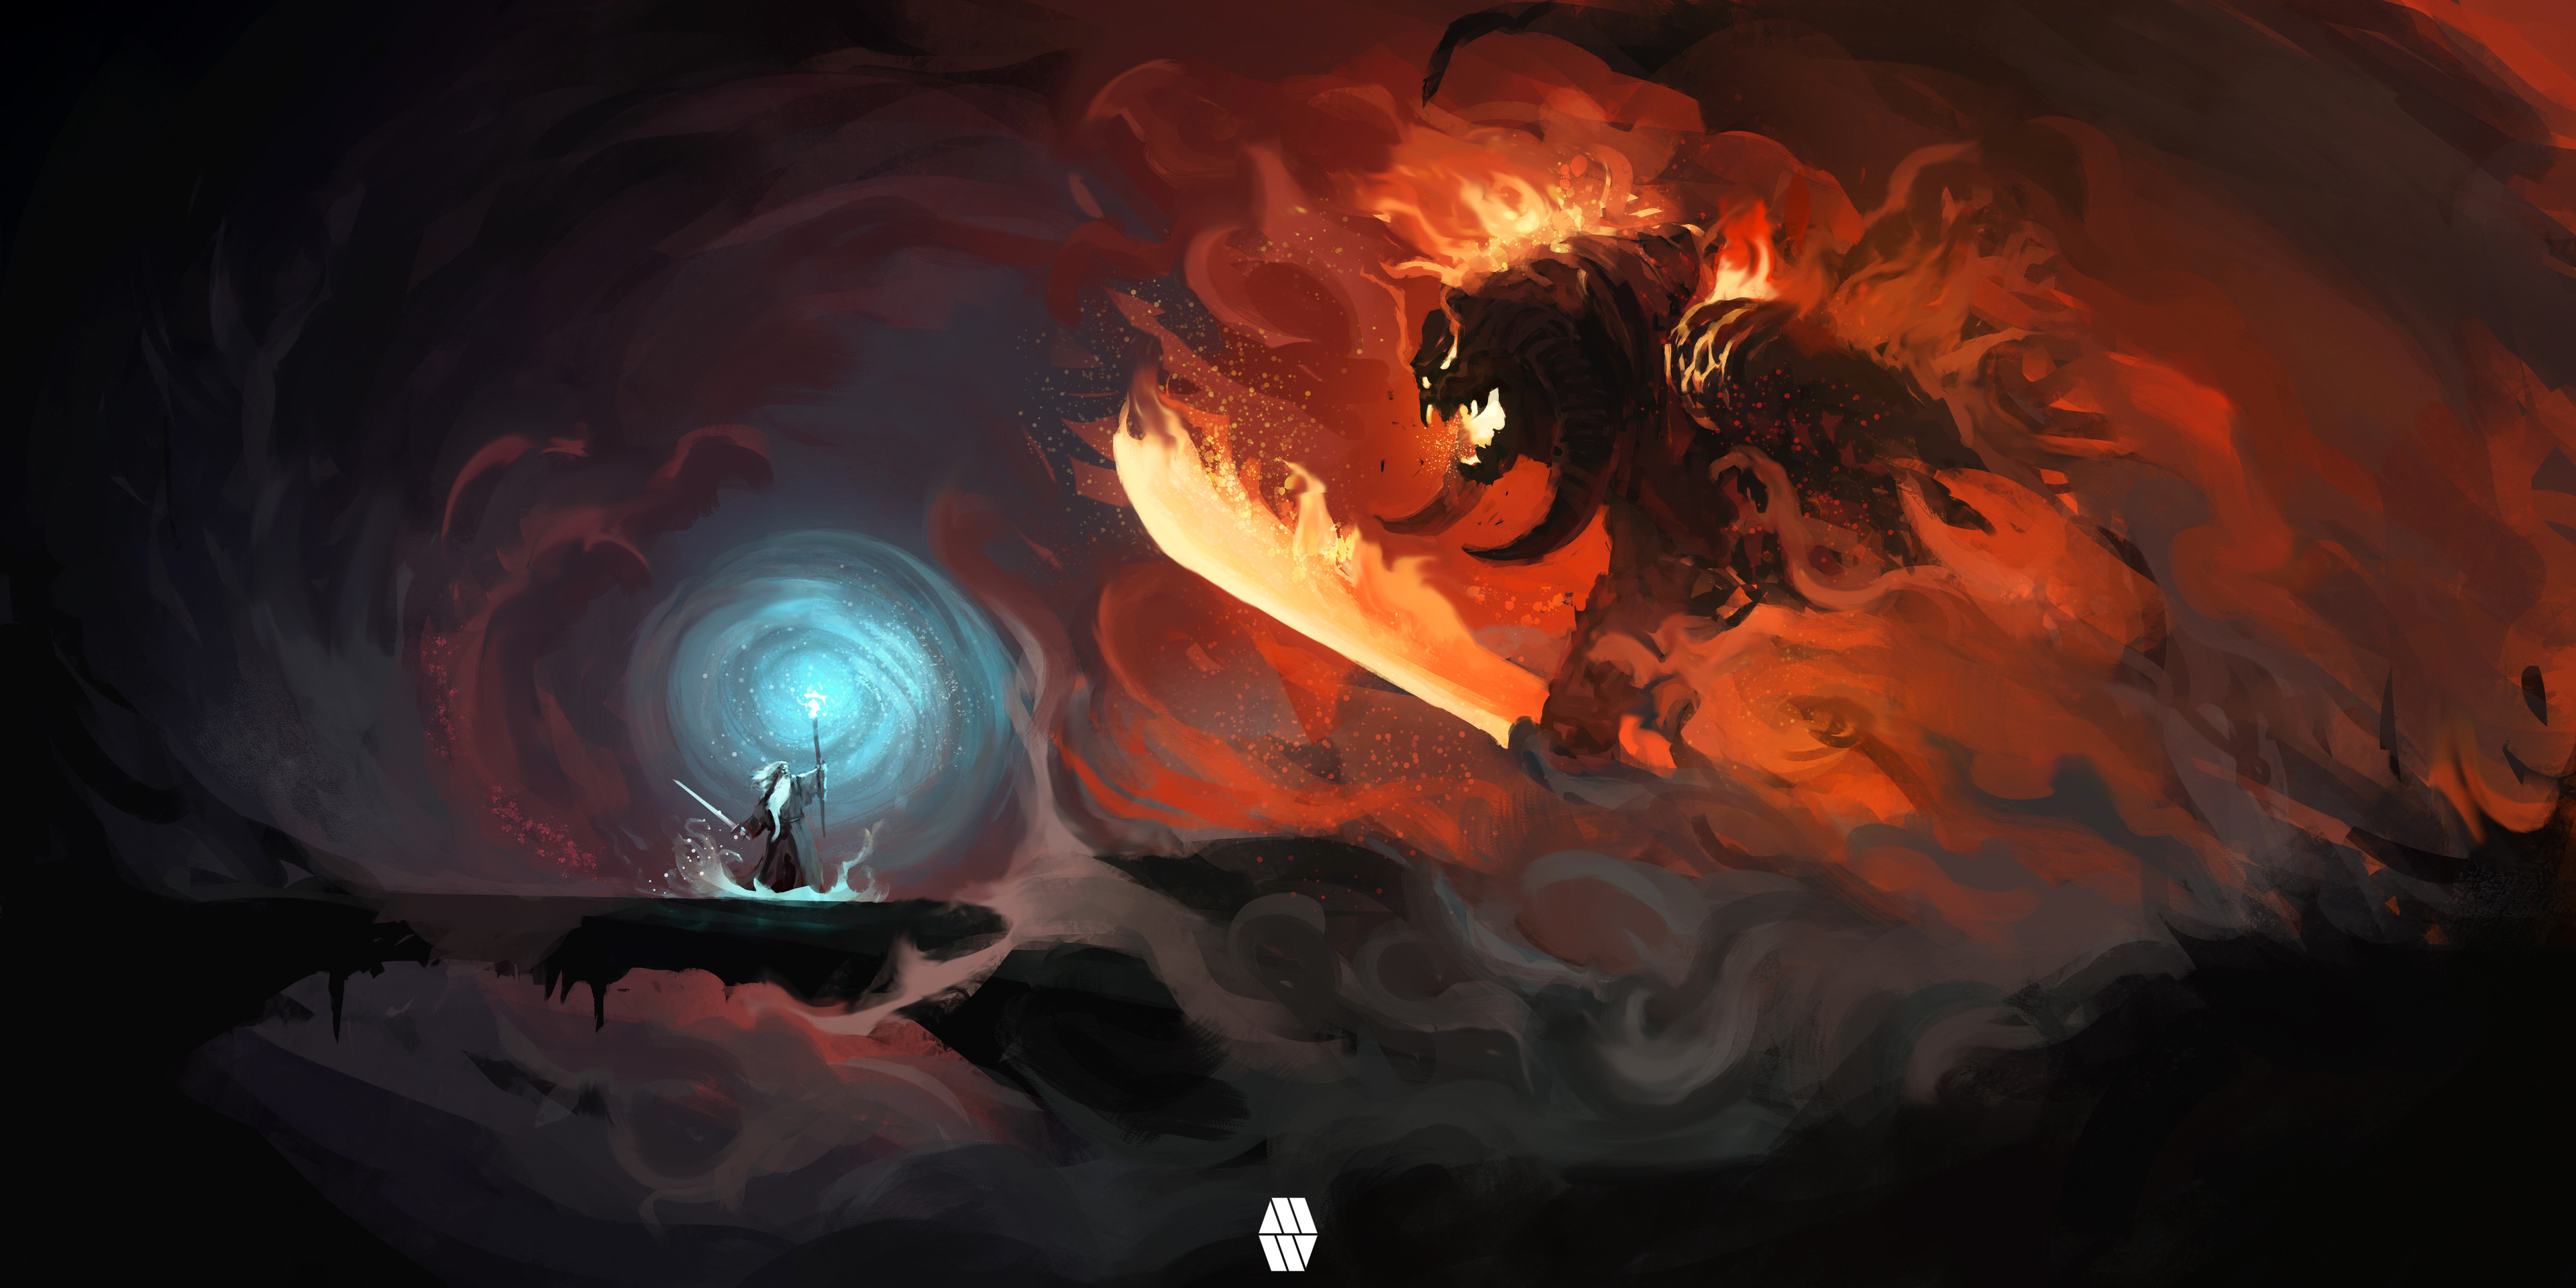 Marcus Whinney Digital Digital Art Artwork The Lord Of The Rings Fan Art Gandalf Fighting Balrog Cre 3840x1920